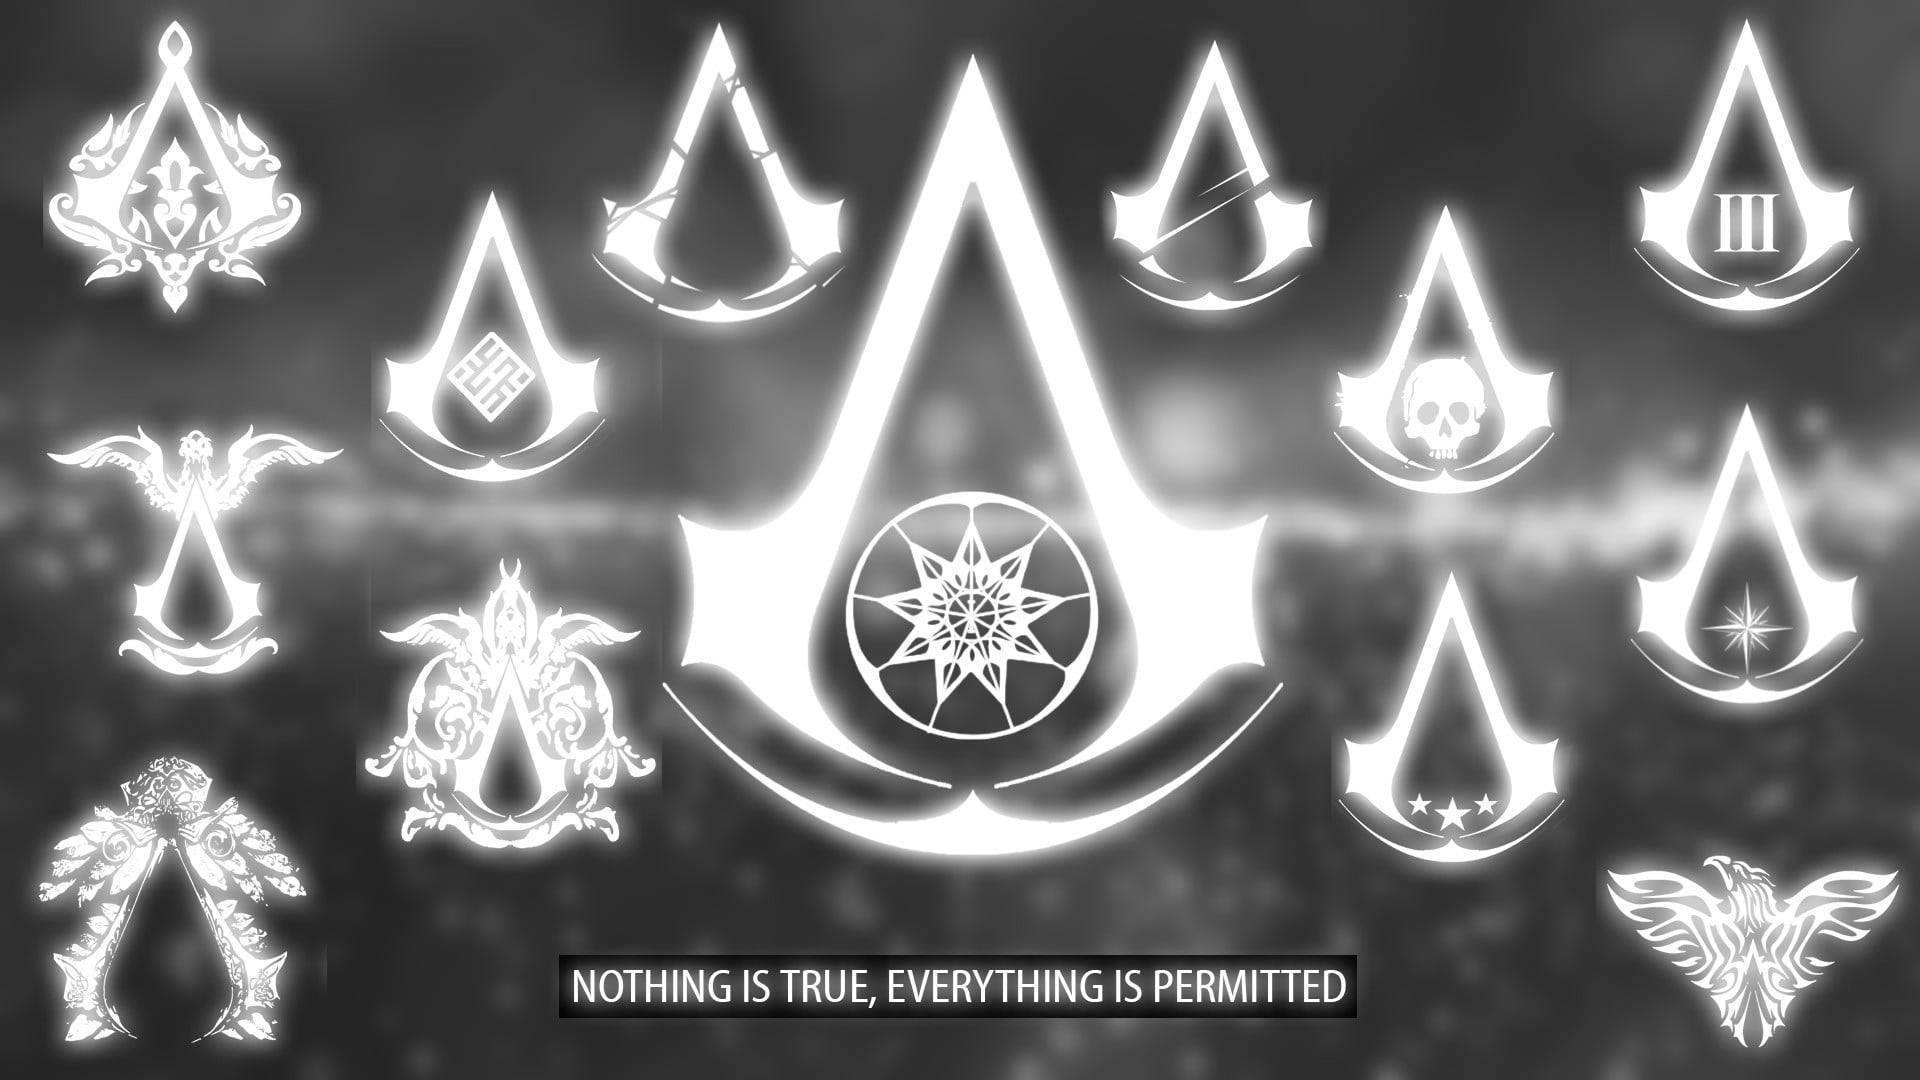 Photo Of Assassins Creed Logo With Nothing Is True